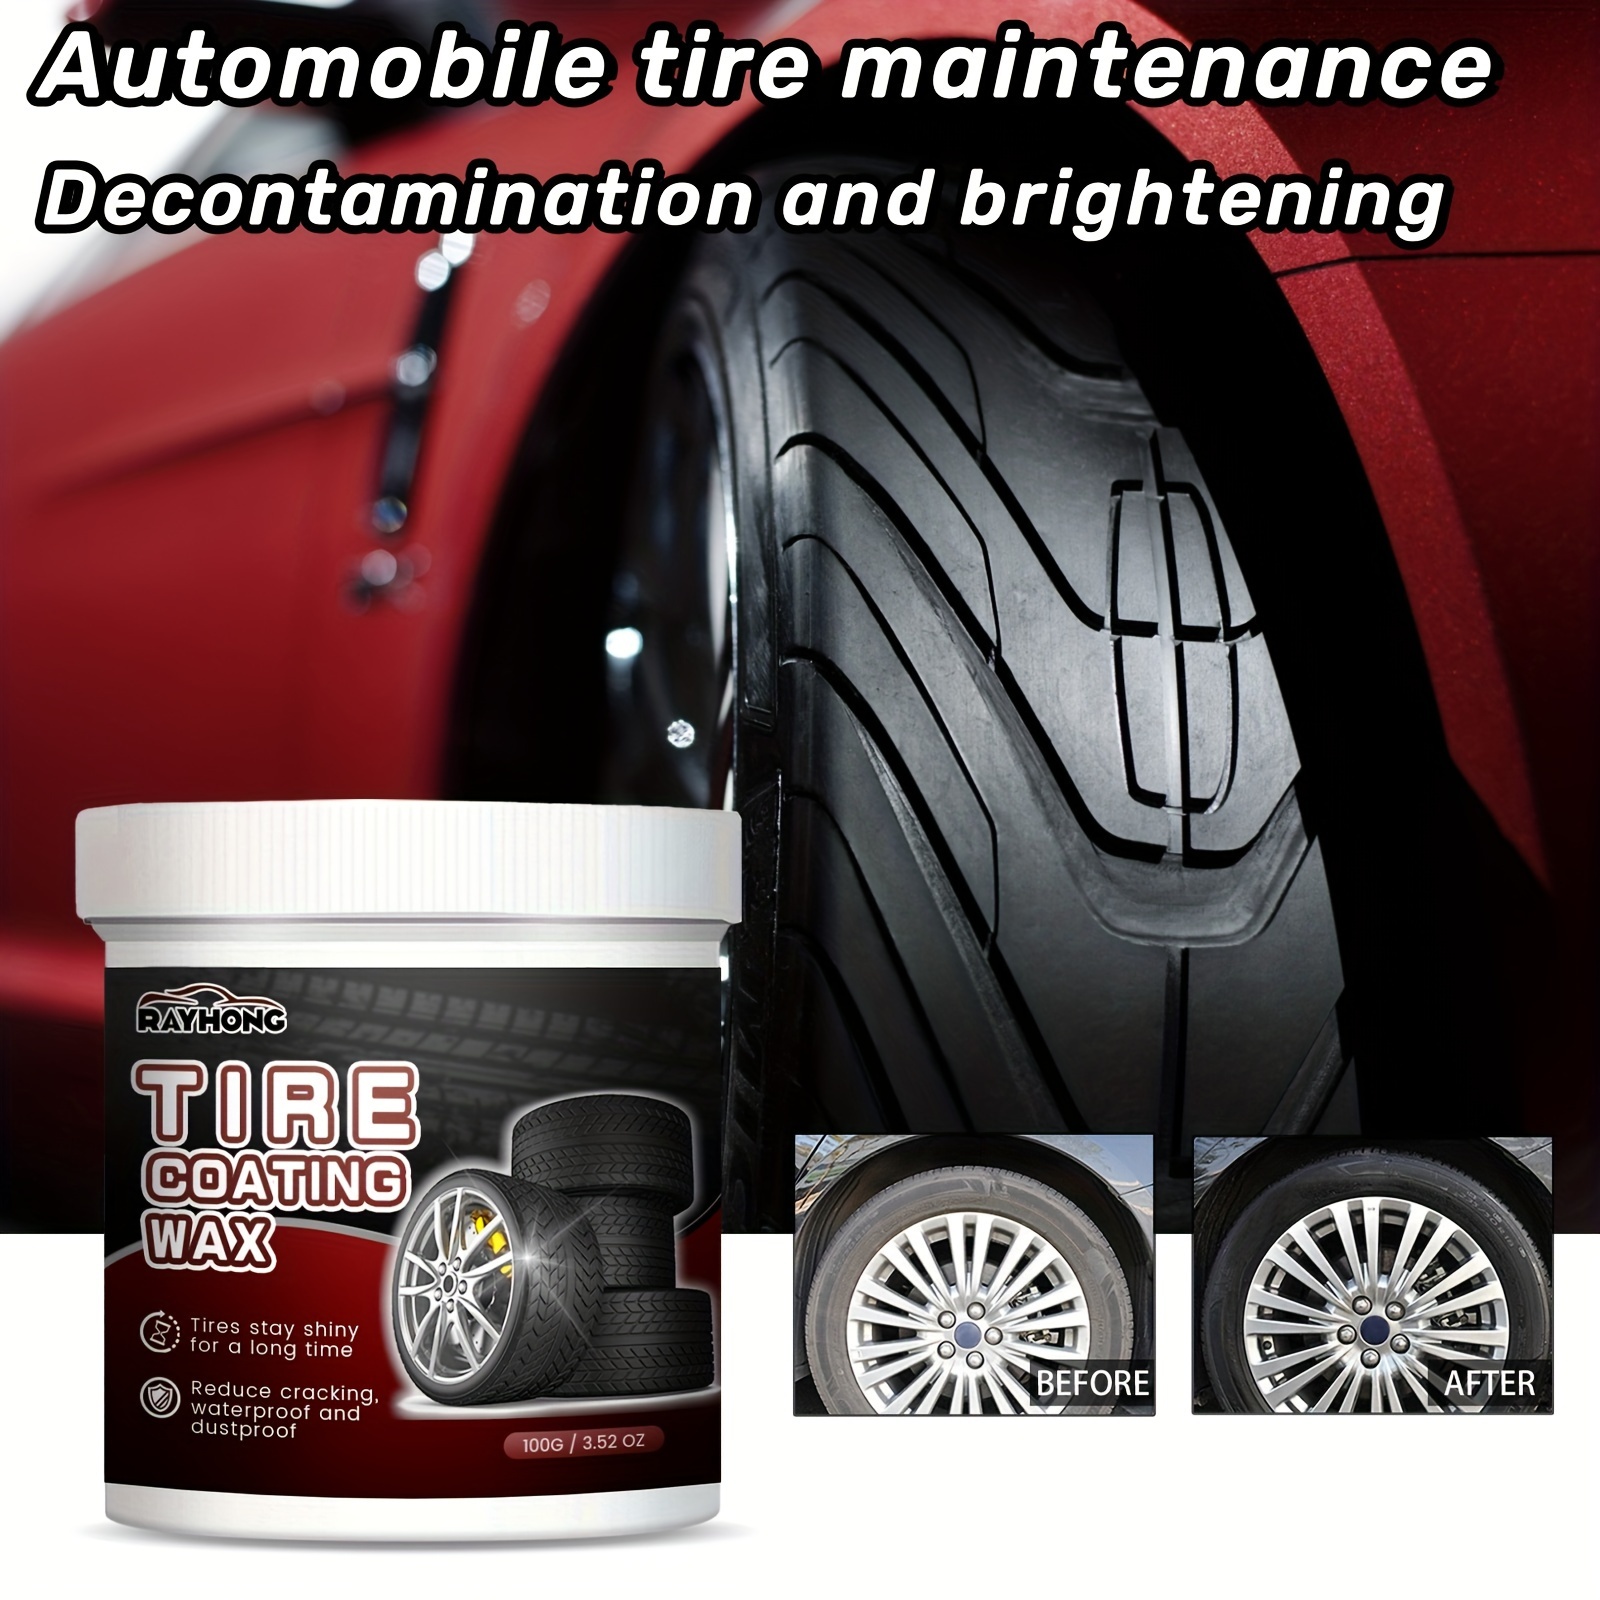 

Rayhong Tire Shine & Rust Remover - Durable Car Tire Cleaner For Brightening And Maintenance